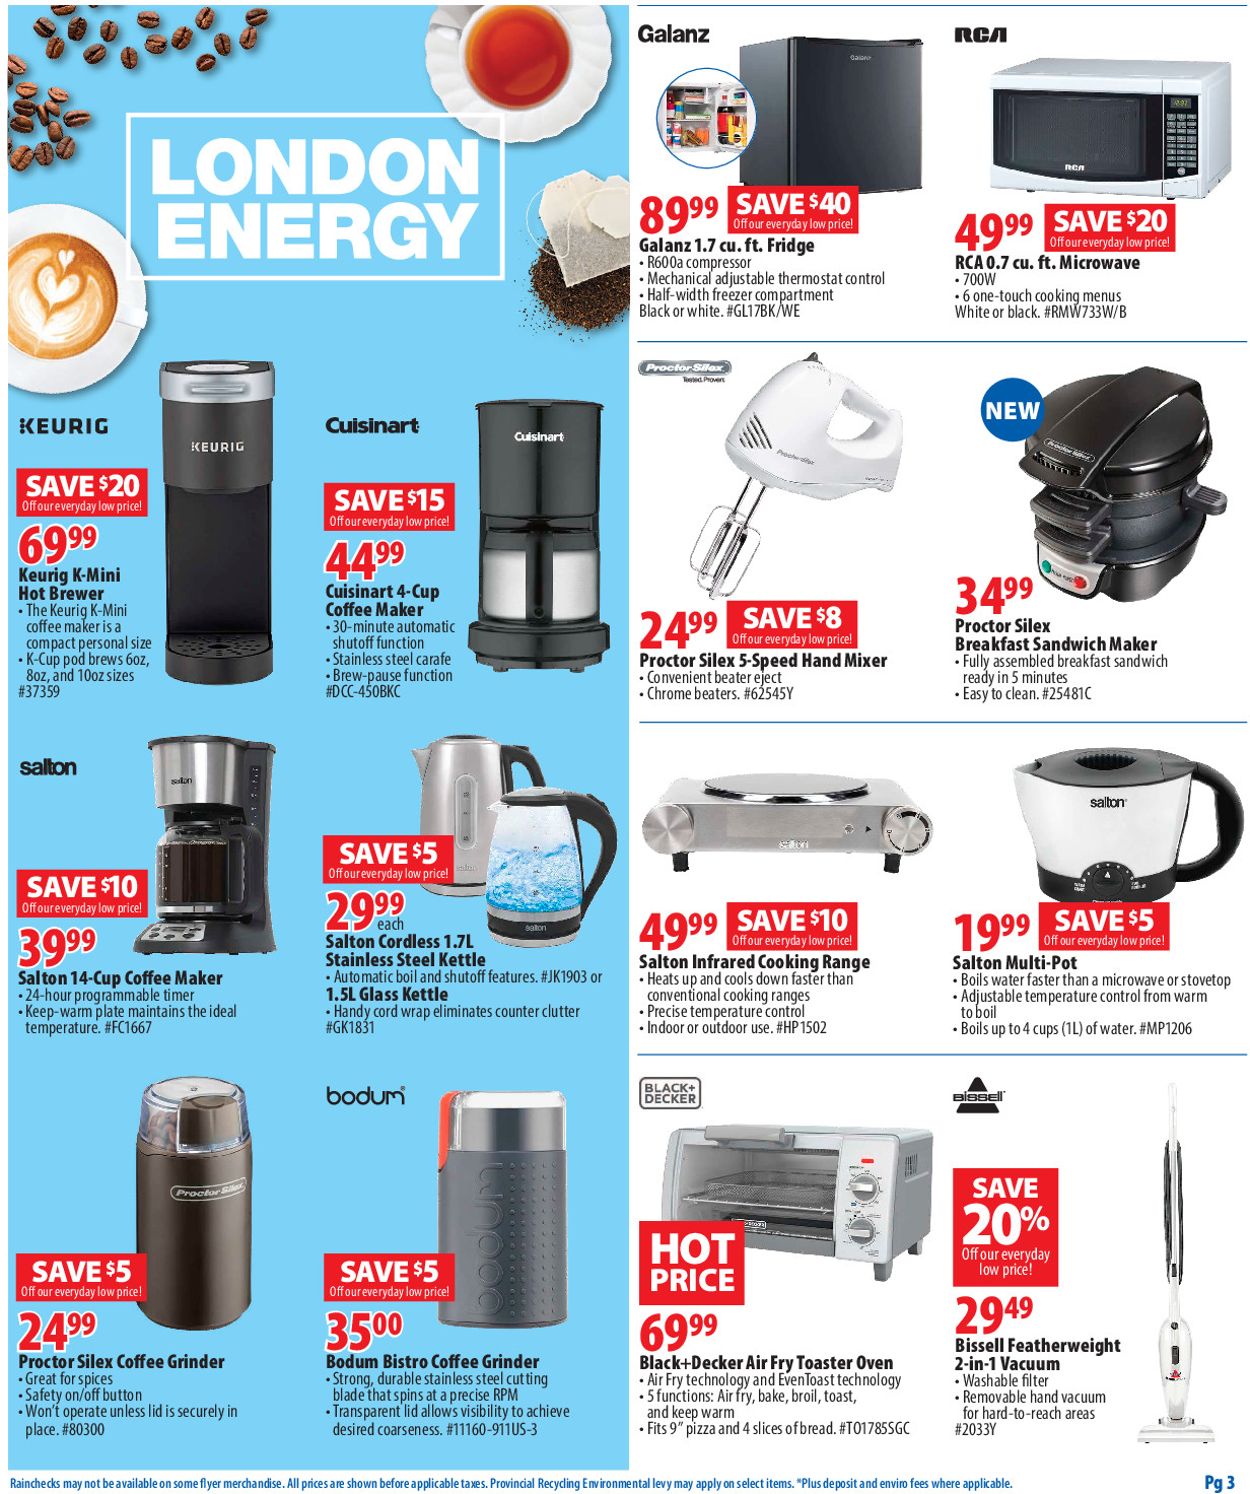 London Drugs Flyer from 08/14/2020